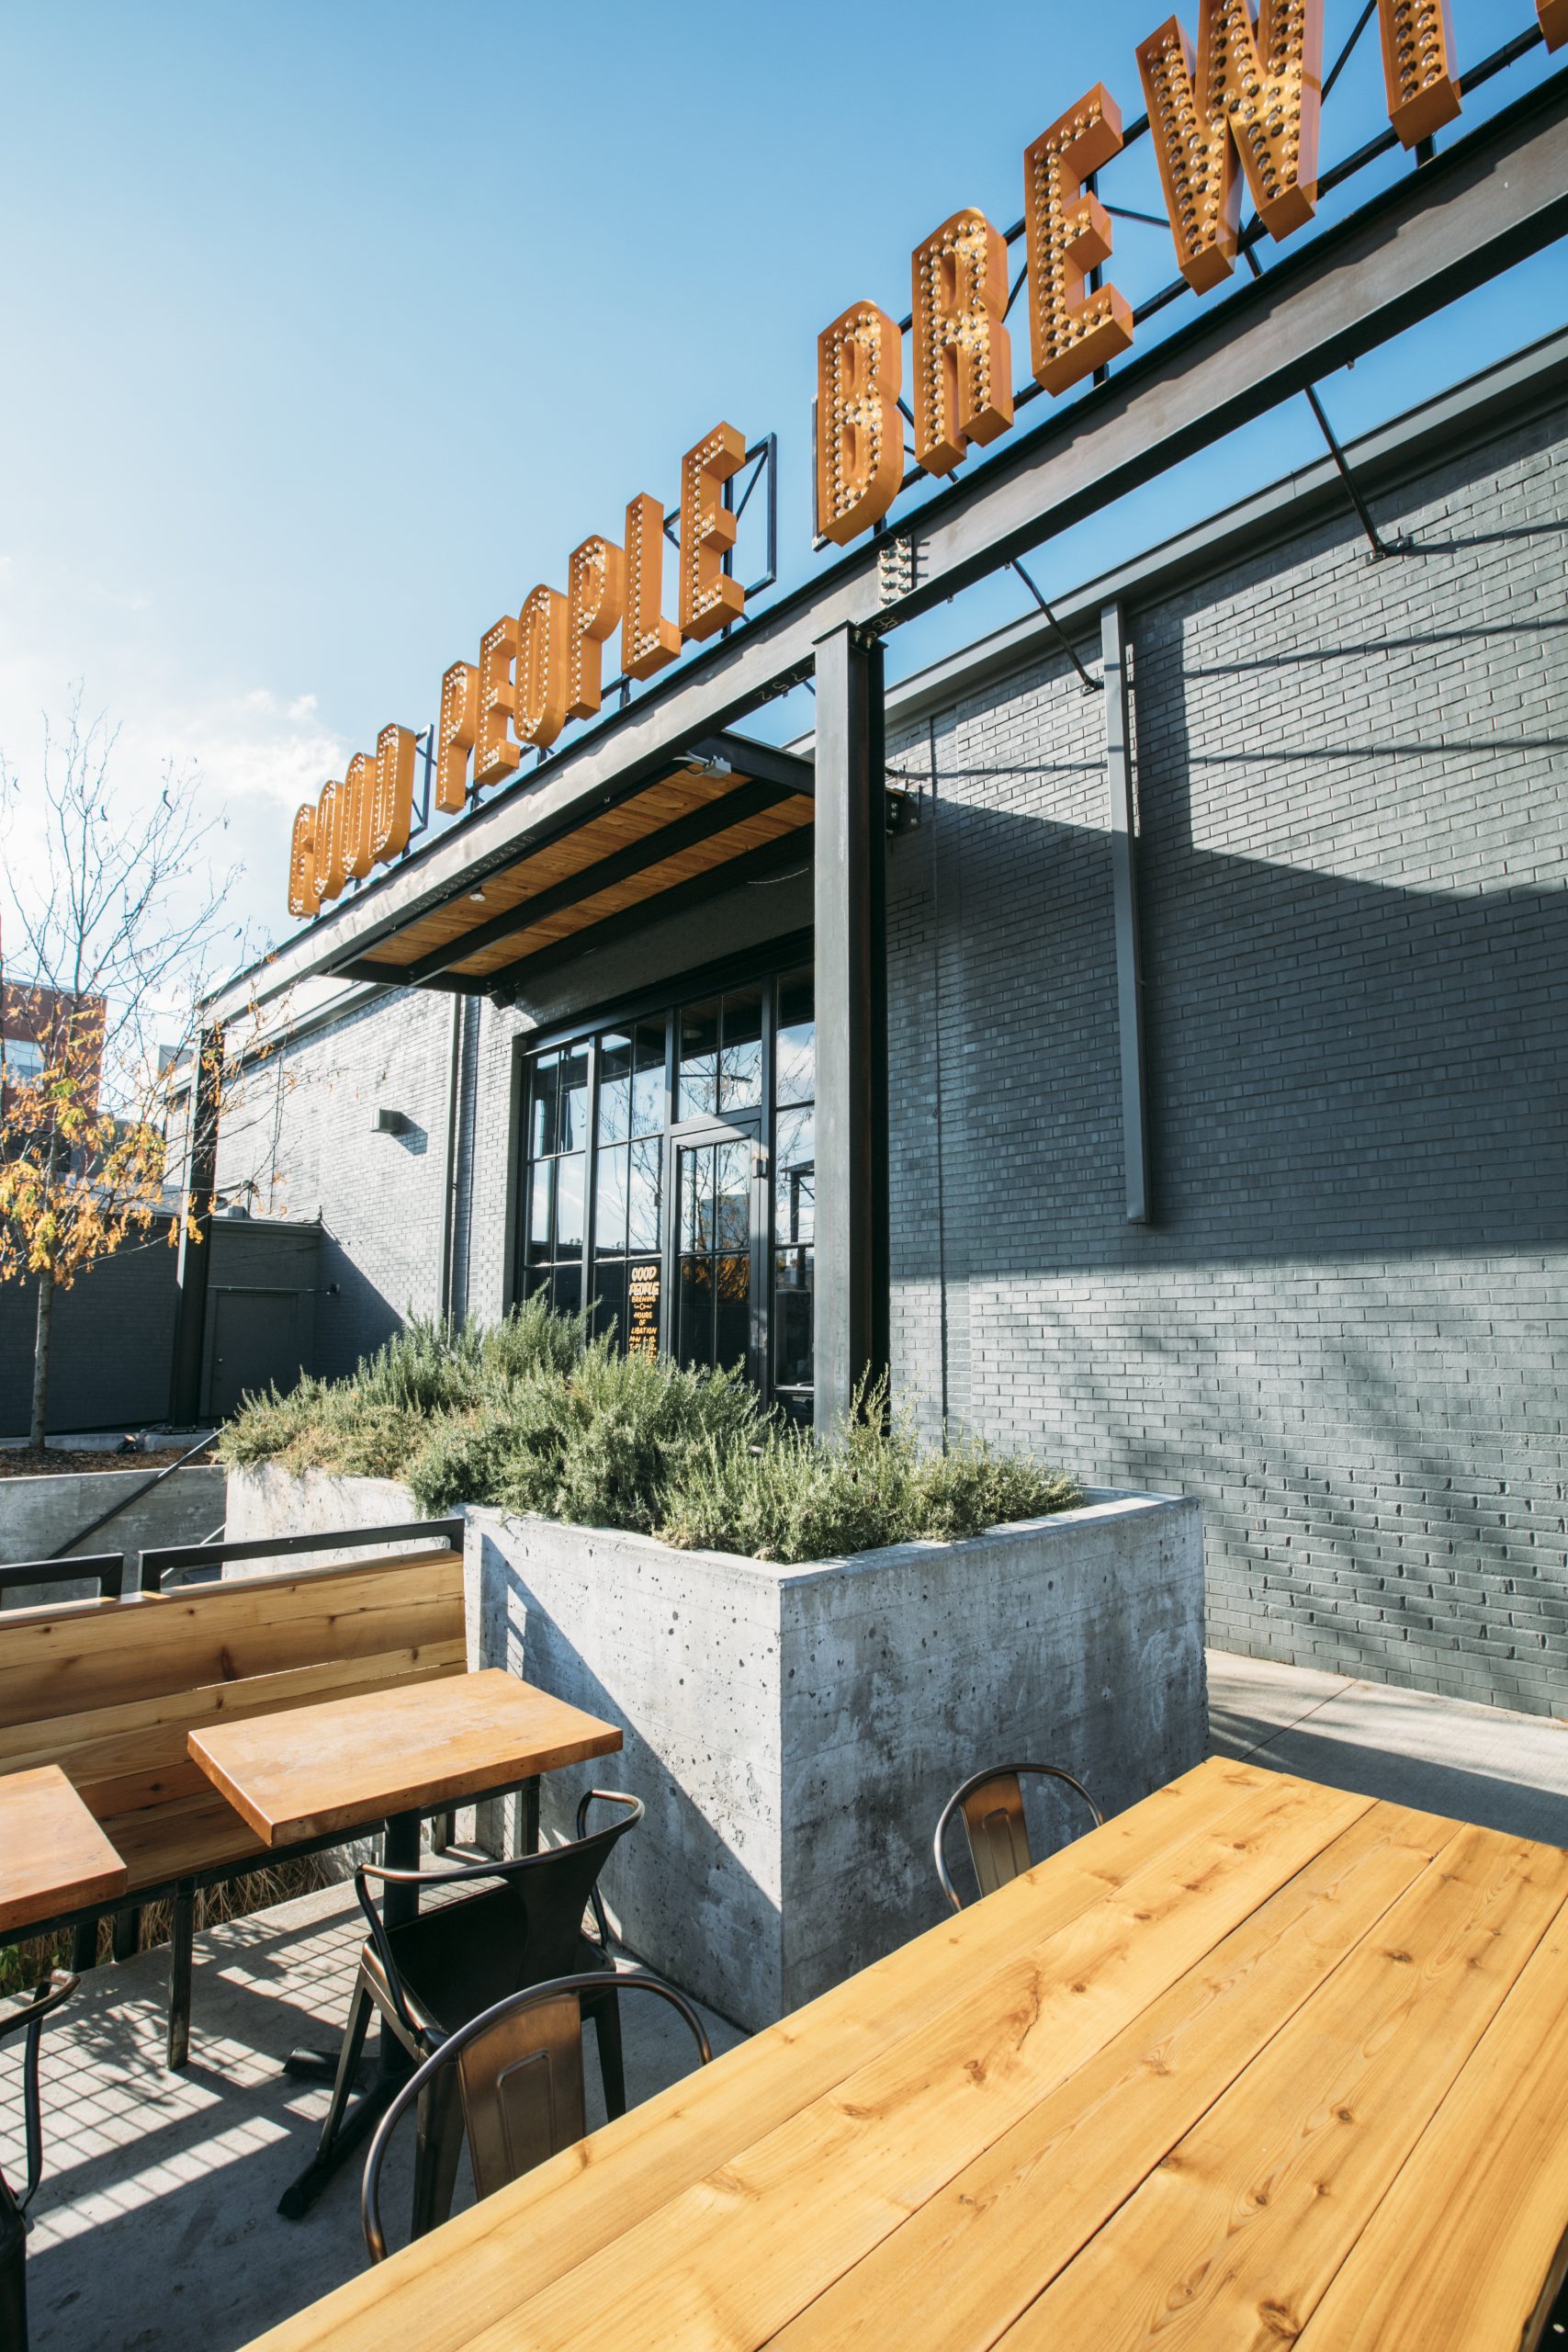 22 Restaurants and Bars with Outdoor Seating in Birmingham - Greater